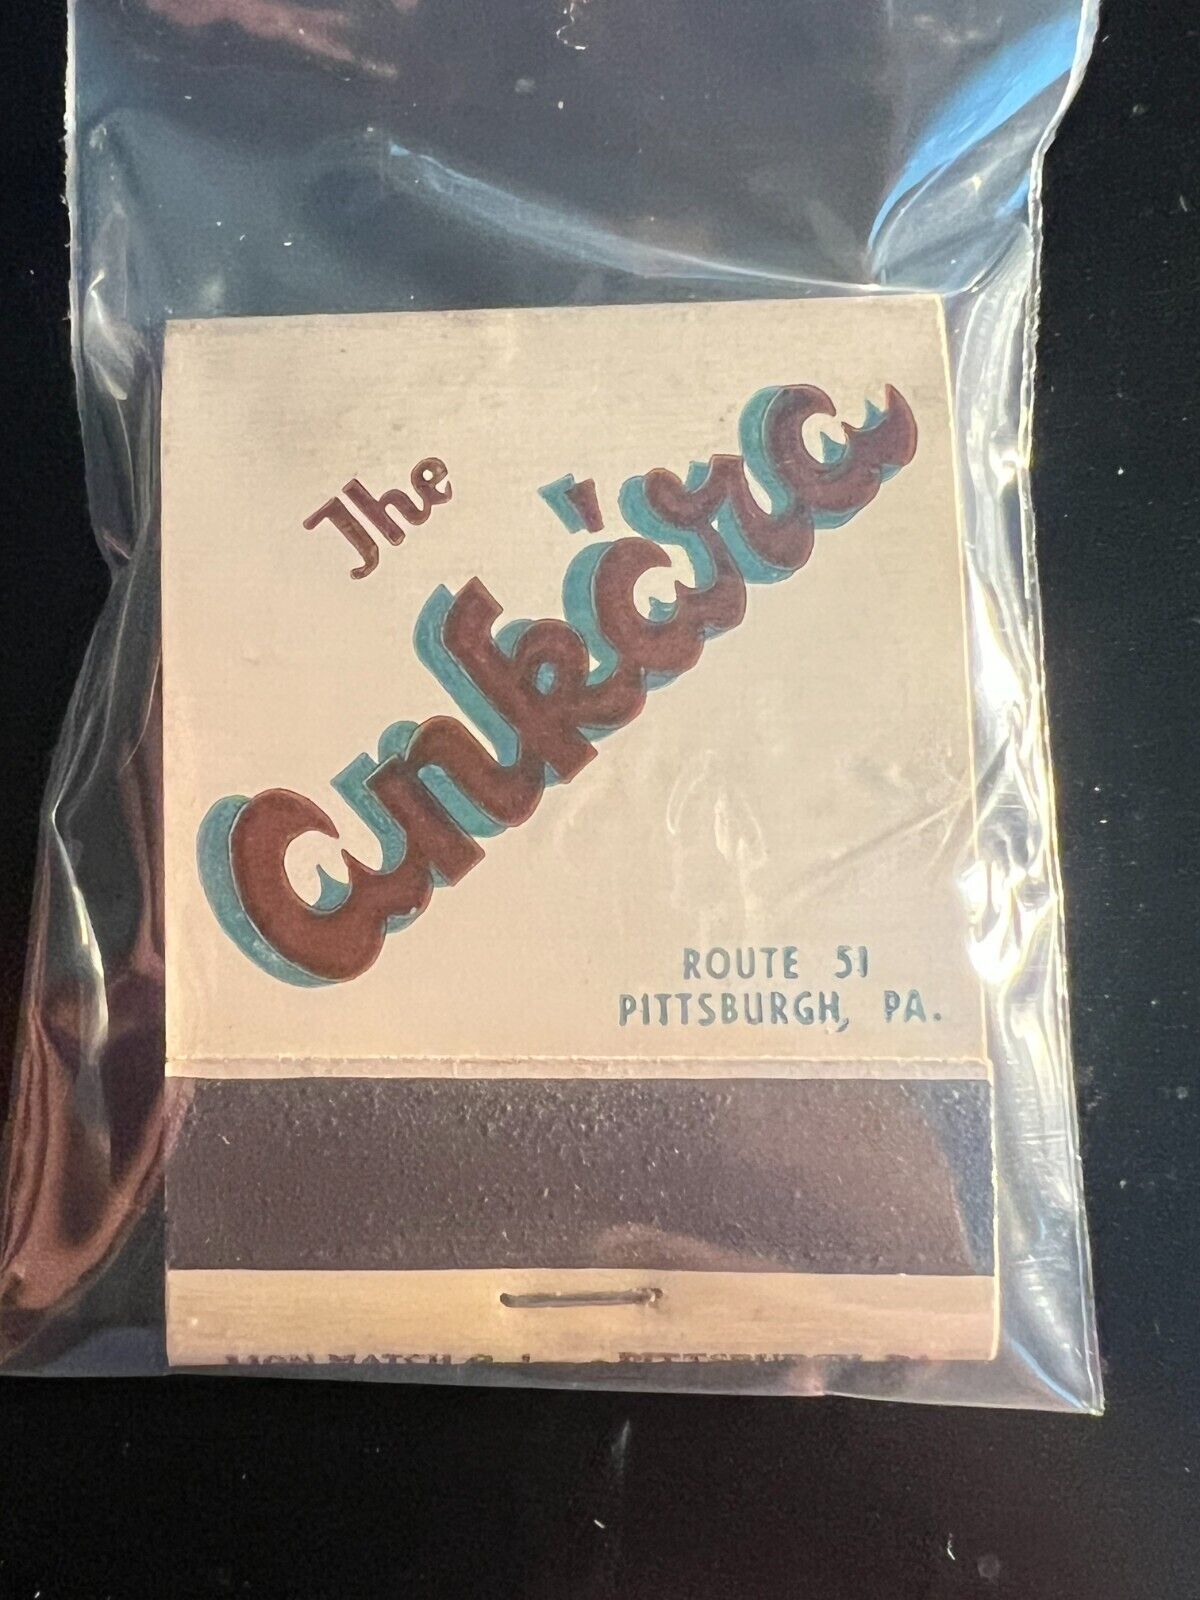 VINTAGE MATCHBOOK - THE ANKARA - ROUTE 51 - PITTSBURGH, PA - UNSTRUCK